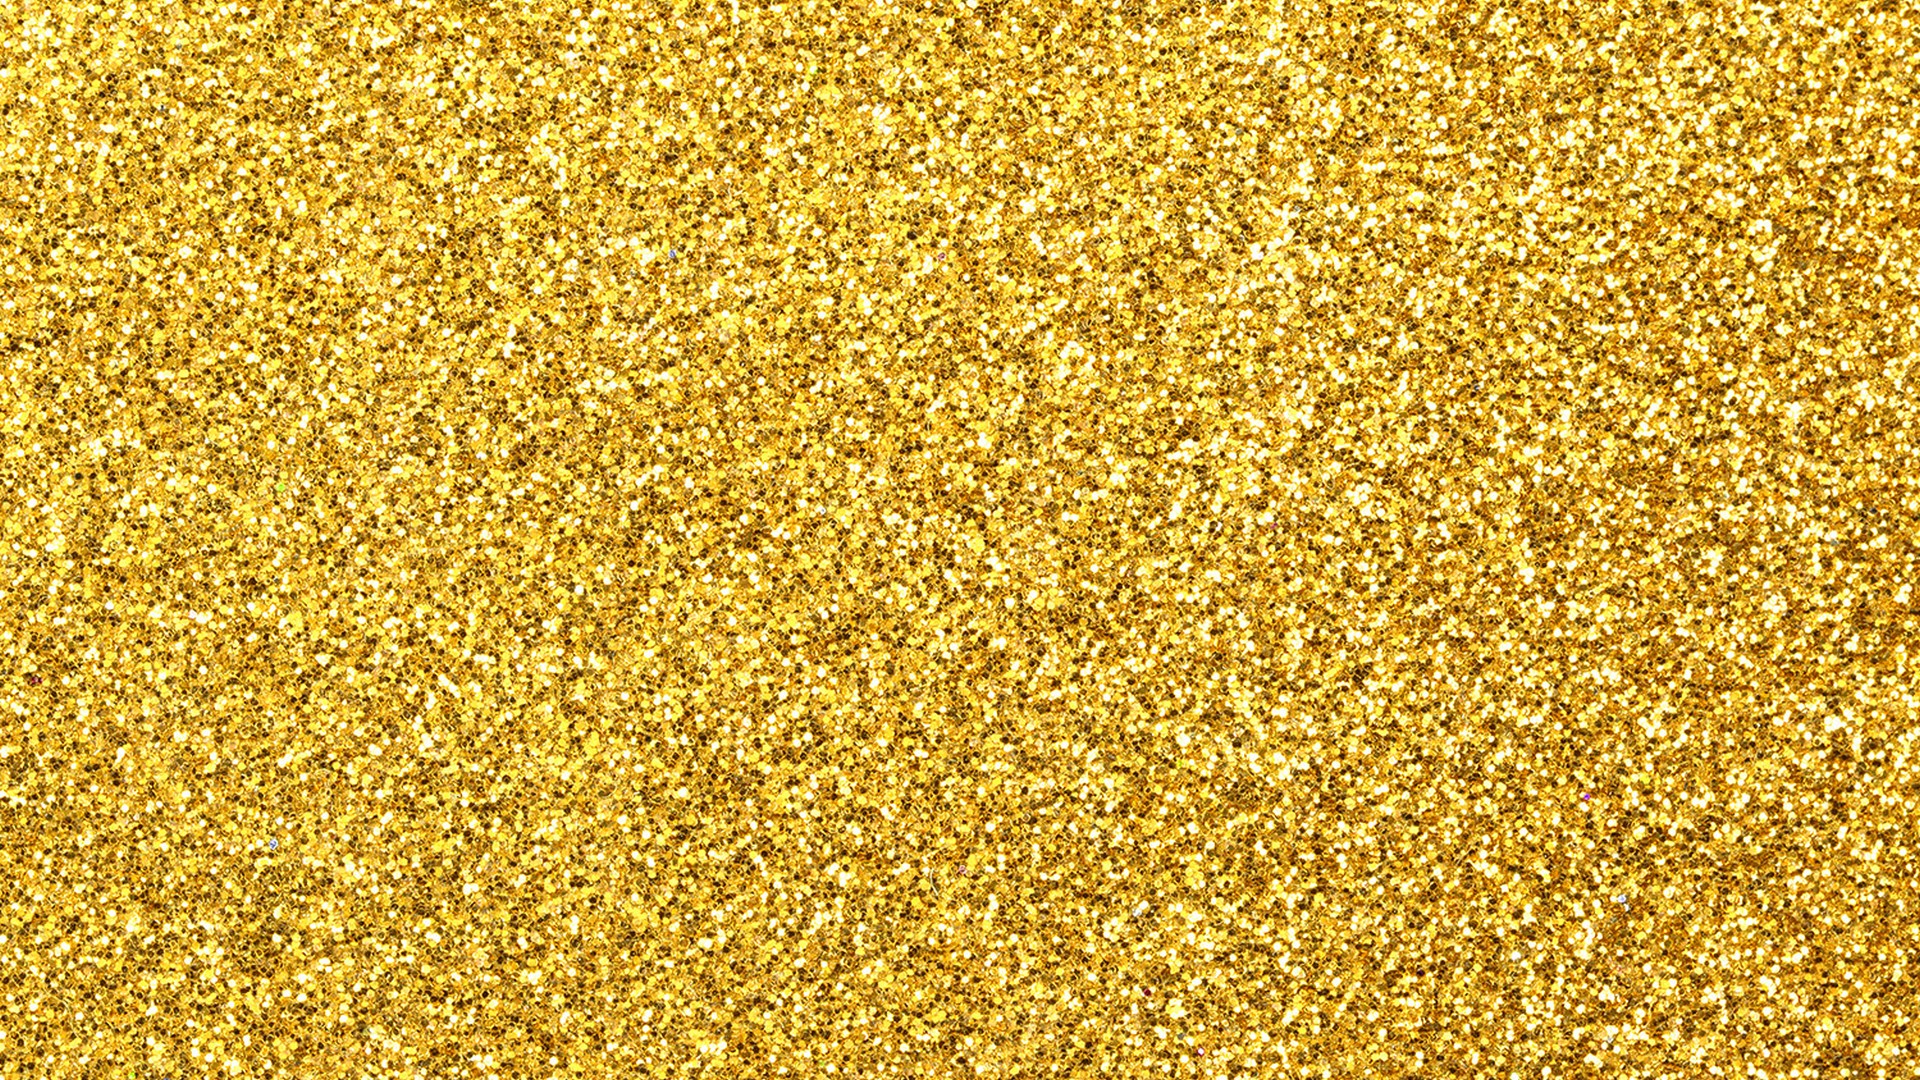 HD Wallpaper Gold Glitter With Resolution 1920X1080